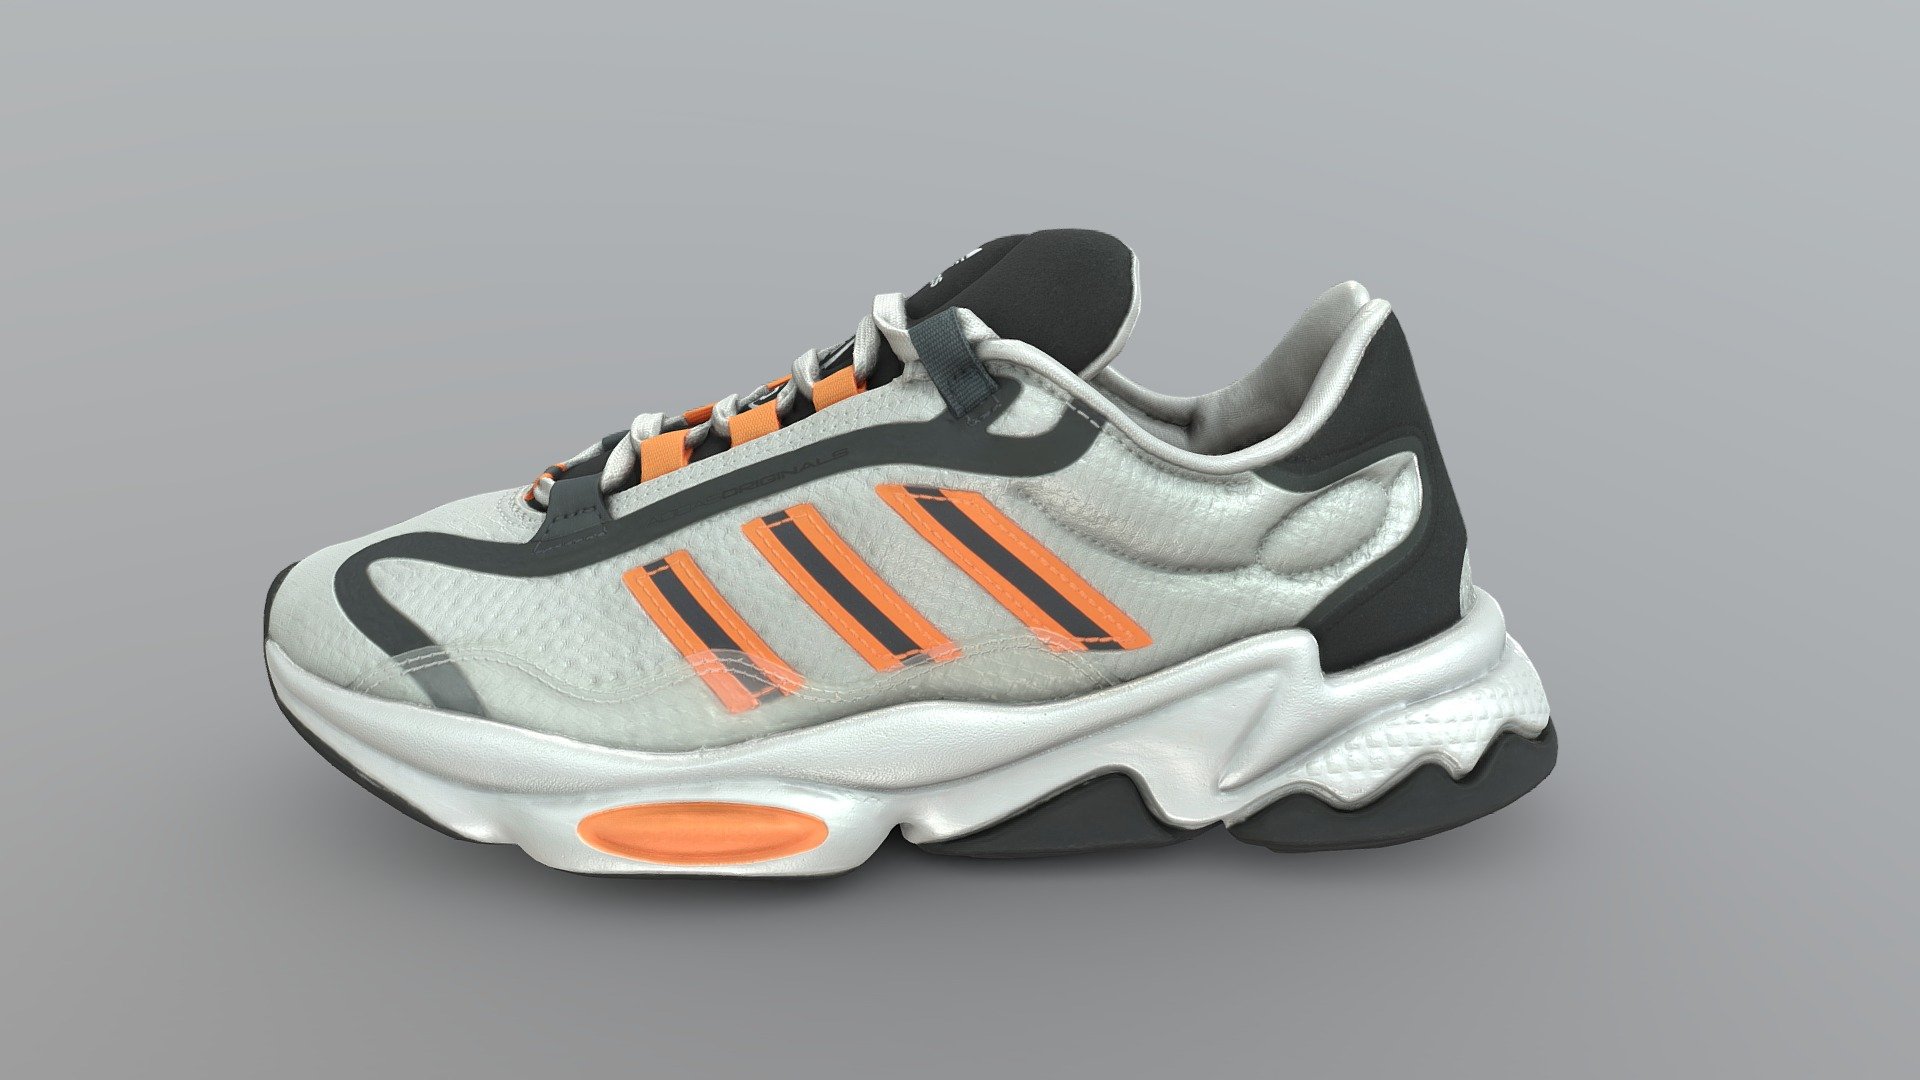 Realistic high detailed Sneaker model with high resolution textures. Model created by our unique semi-automatic scanning technology

Optimized for 3D web and AR / VR

=======FEATURES===========




The units of measurement during the creation process were milimeters. 

Clean and optimized topology is used for maximum polygon efficiency. 

This model consists of 1 meshes.

All objects have fully unwrapped UVs.

The model has 2 material Includes high detailed normal map

Includes High detail 4096x4096 .png textures (diffuse (base color), Roughness, Metallness, Normal) 95k polygons - Adidas Ozweego Pure sneaker - Buy Royalty Free 3D model by VRModelFactory 3d model